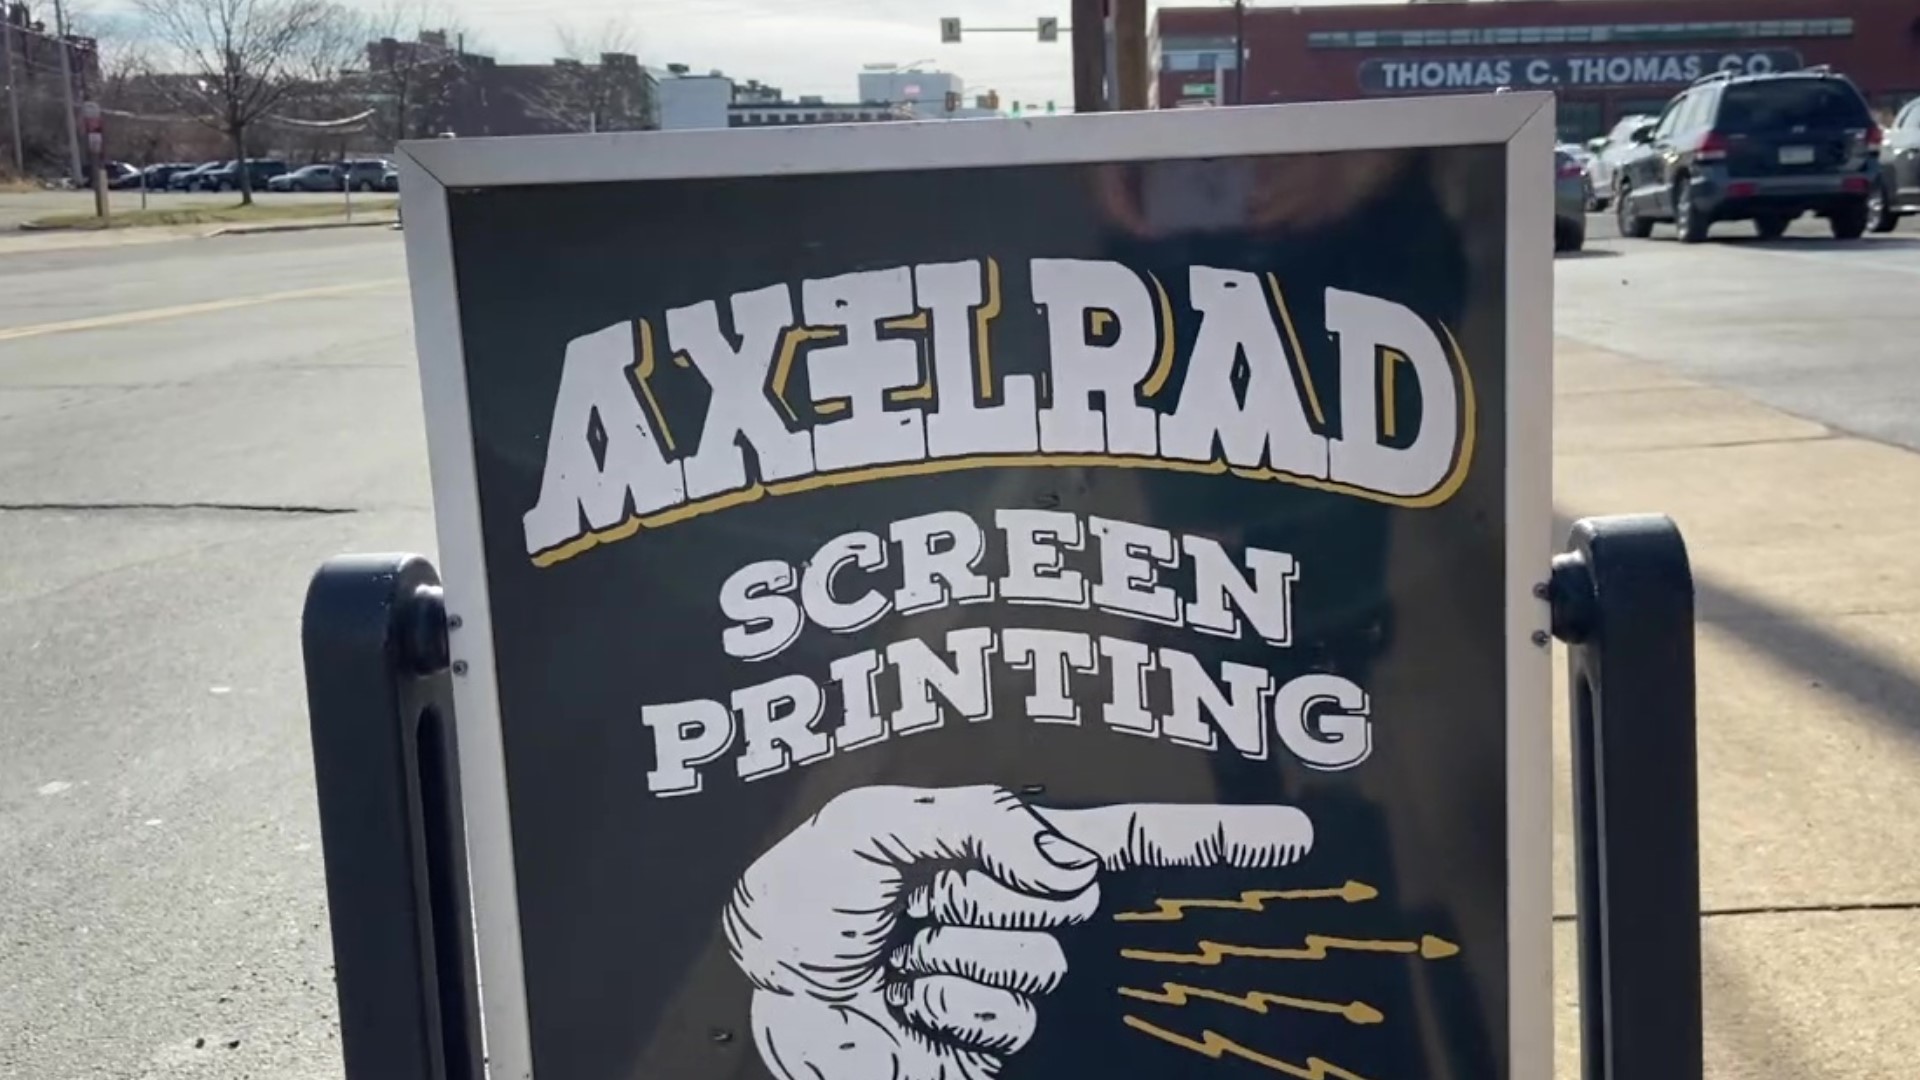 The screen printing company in Wilkes-Barre is giving back in the best way they know how, by making t-shirts.